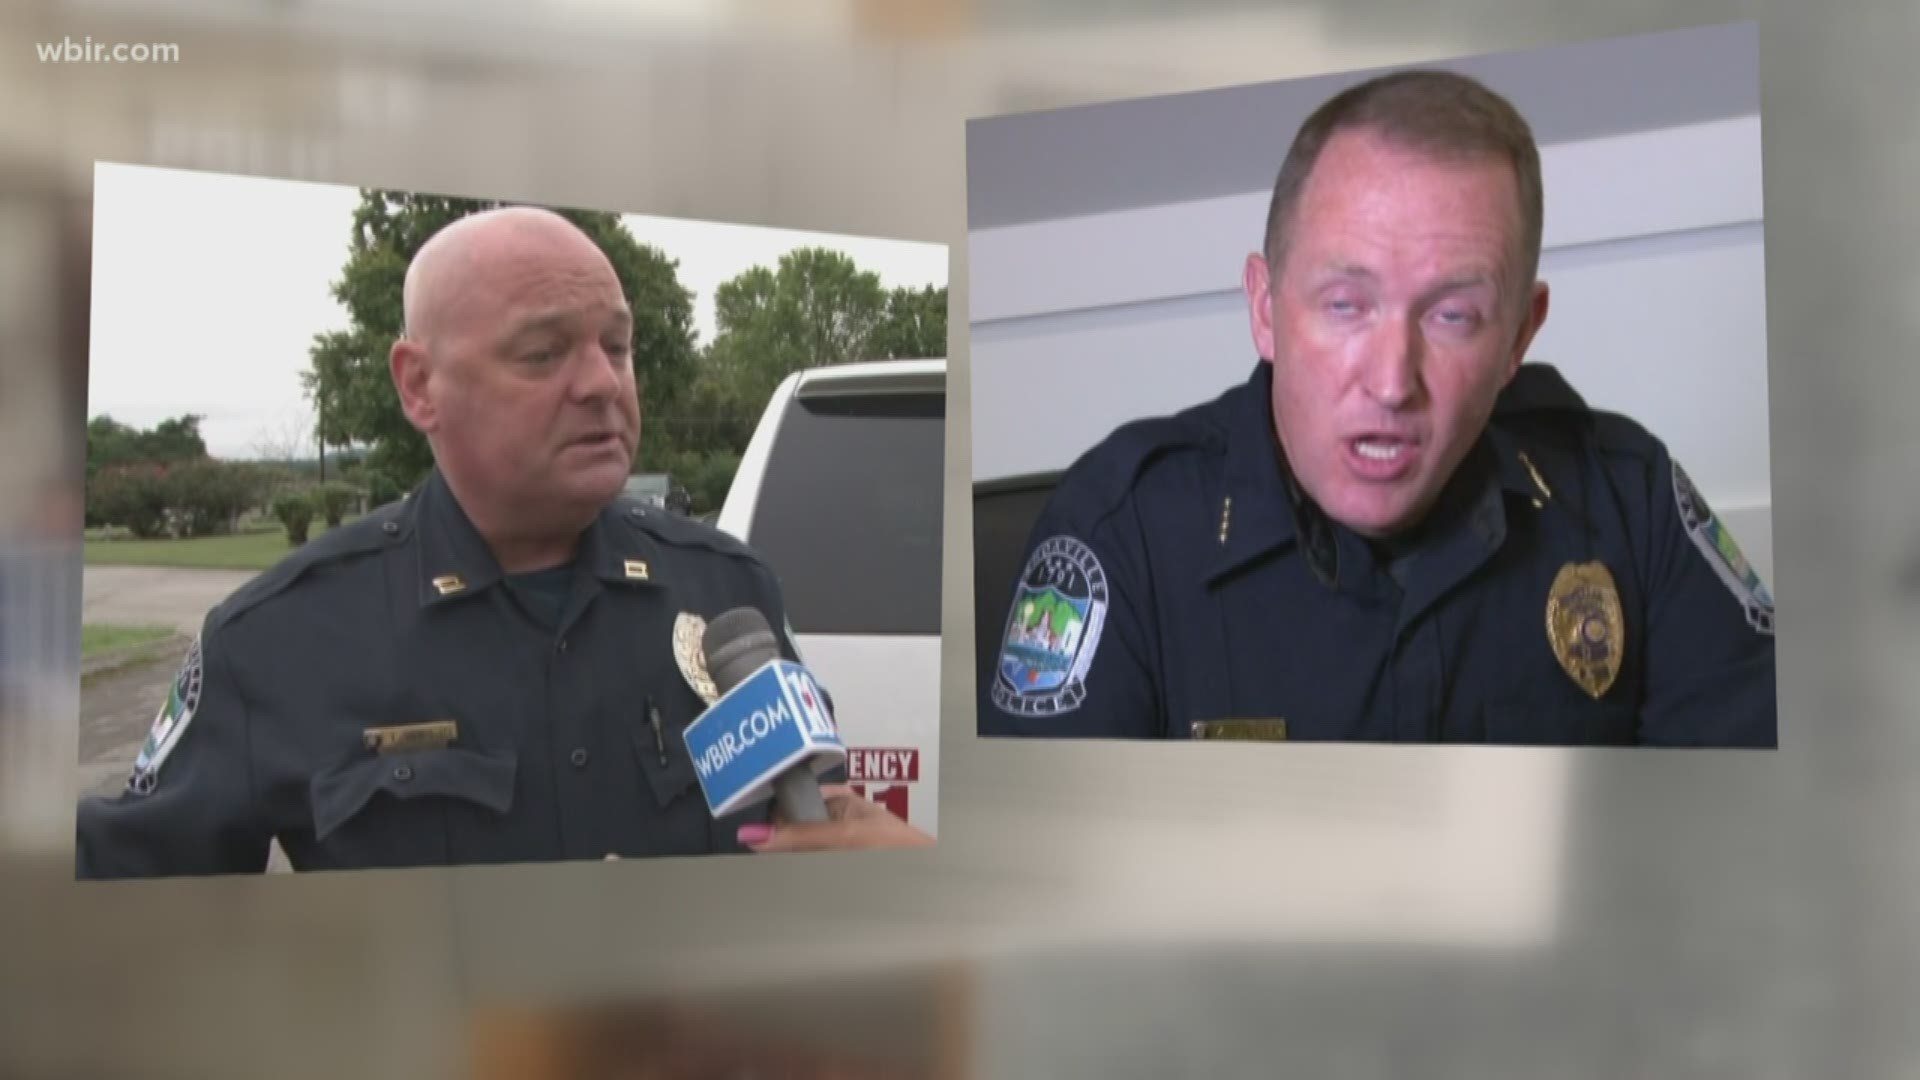 The now-former Knoxville police department lieutenant whose complaint sparked an internal affairs investigation says chief Eve Thomas retaliated against him.